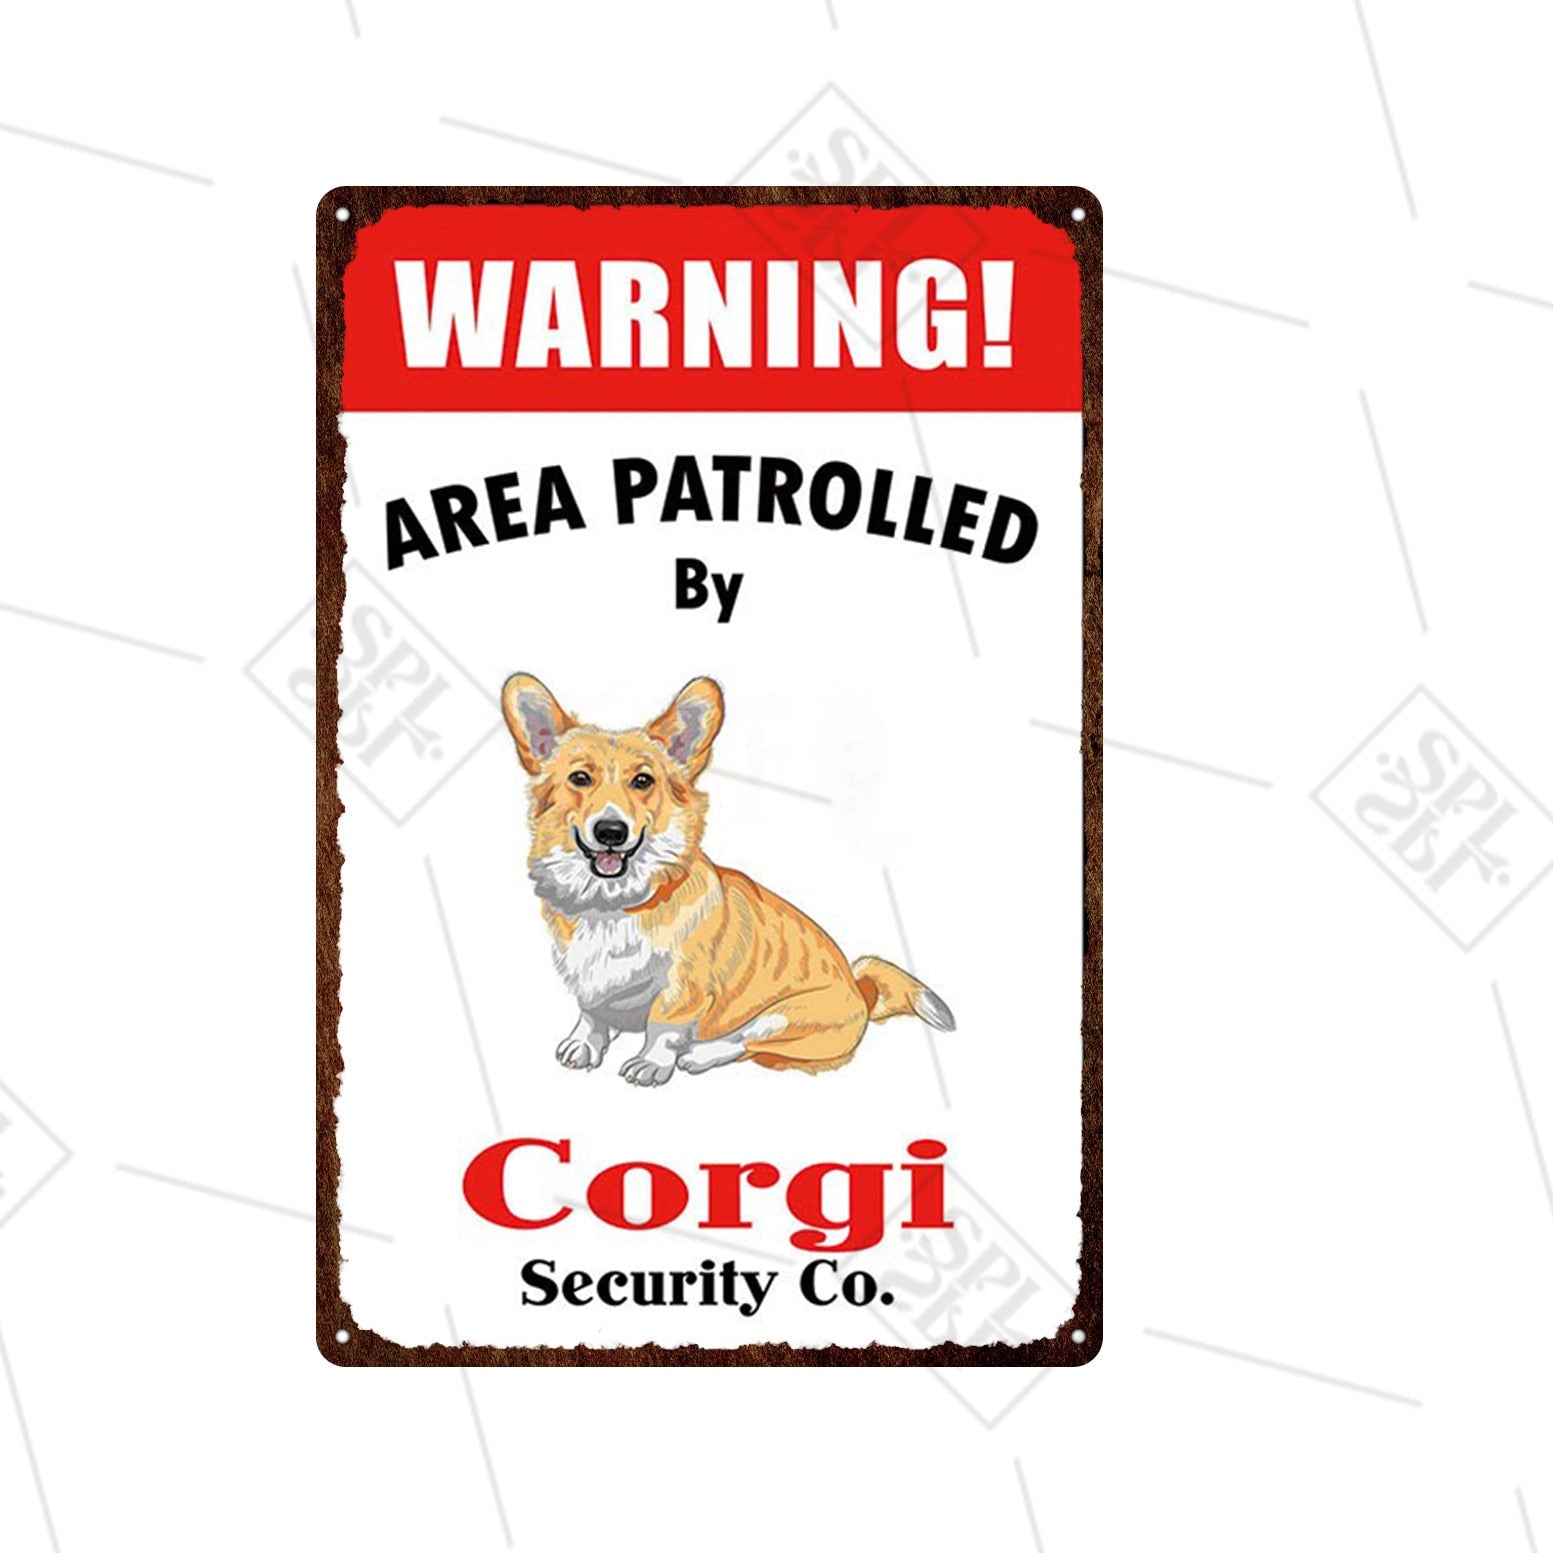 "Warning Area Patrolled by 'Dog' Security & Co" signs - Style's Bug Corgi